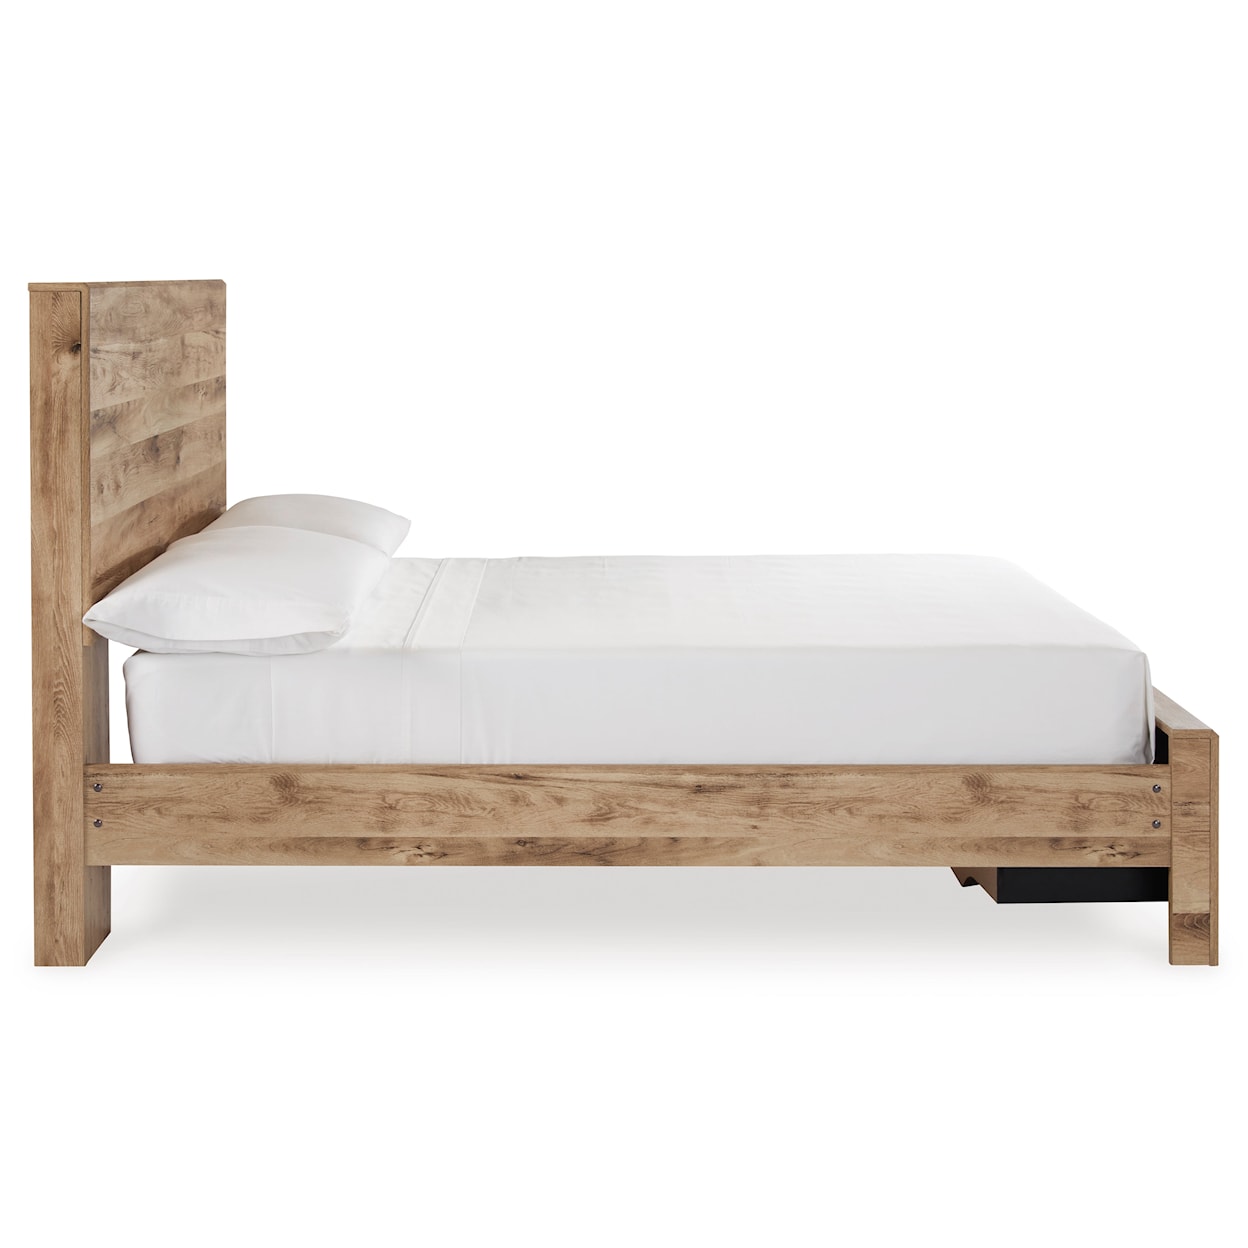 Signature Design by Ashley Furniture Hyanna Full Panel Storage Bed